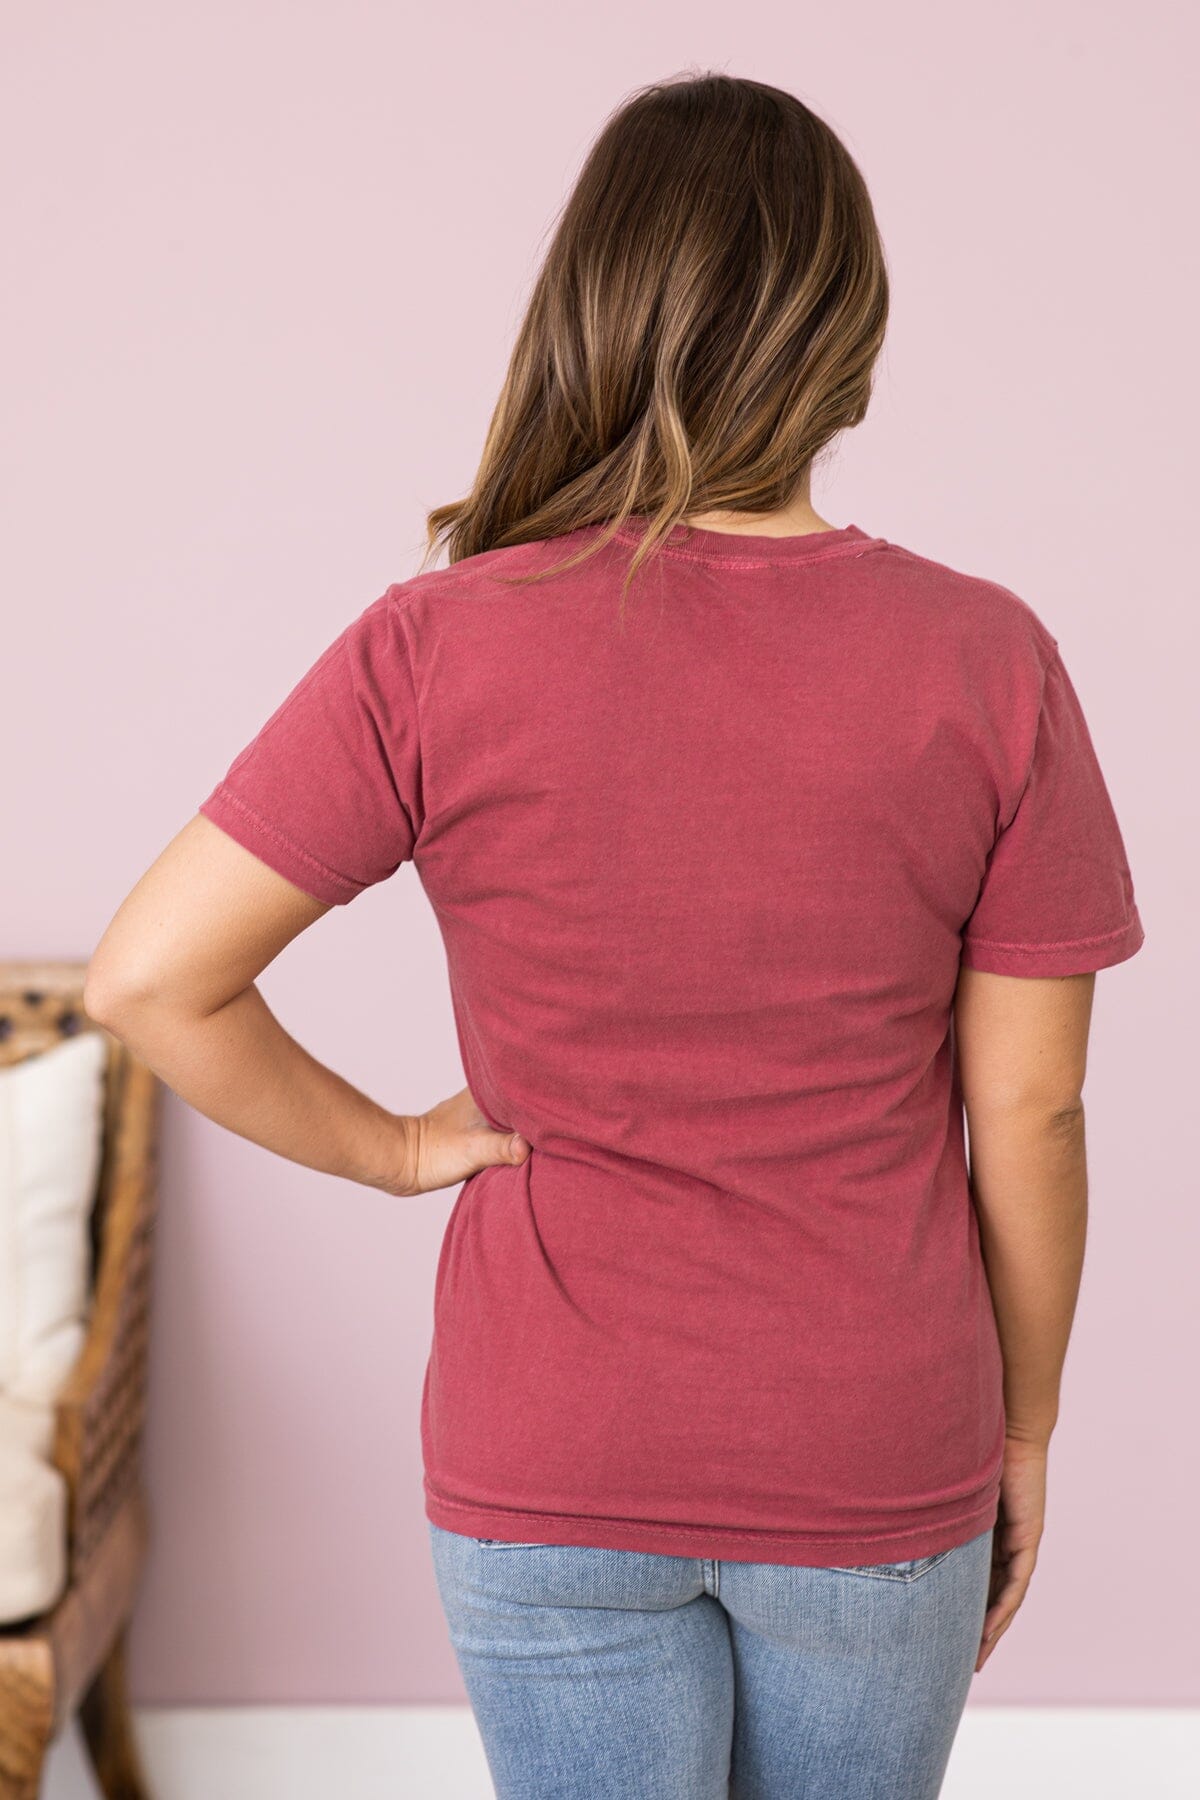 Wine Washed Yellowstone Park Graphic Tee - Filly Flair